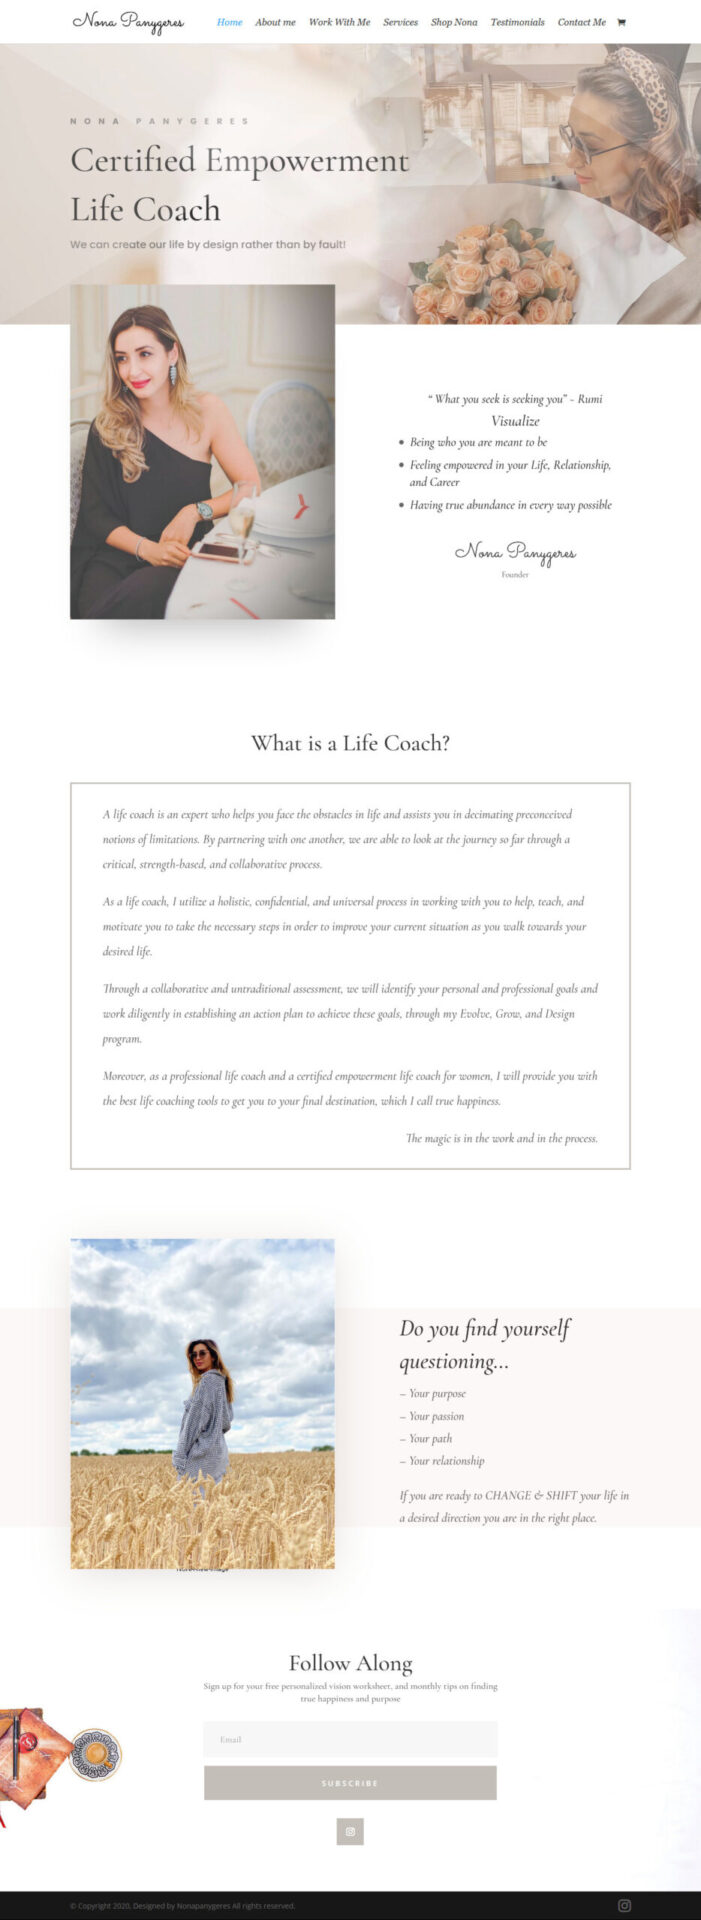 Certified Empowerment Professional Life Coach For Women